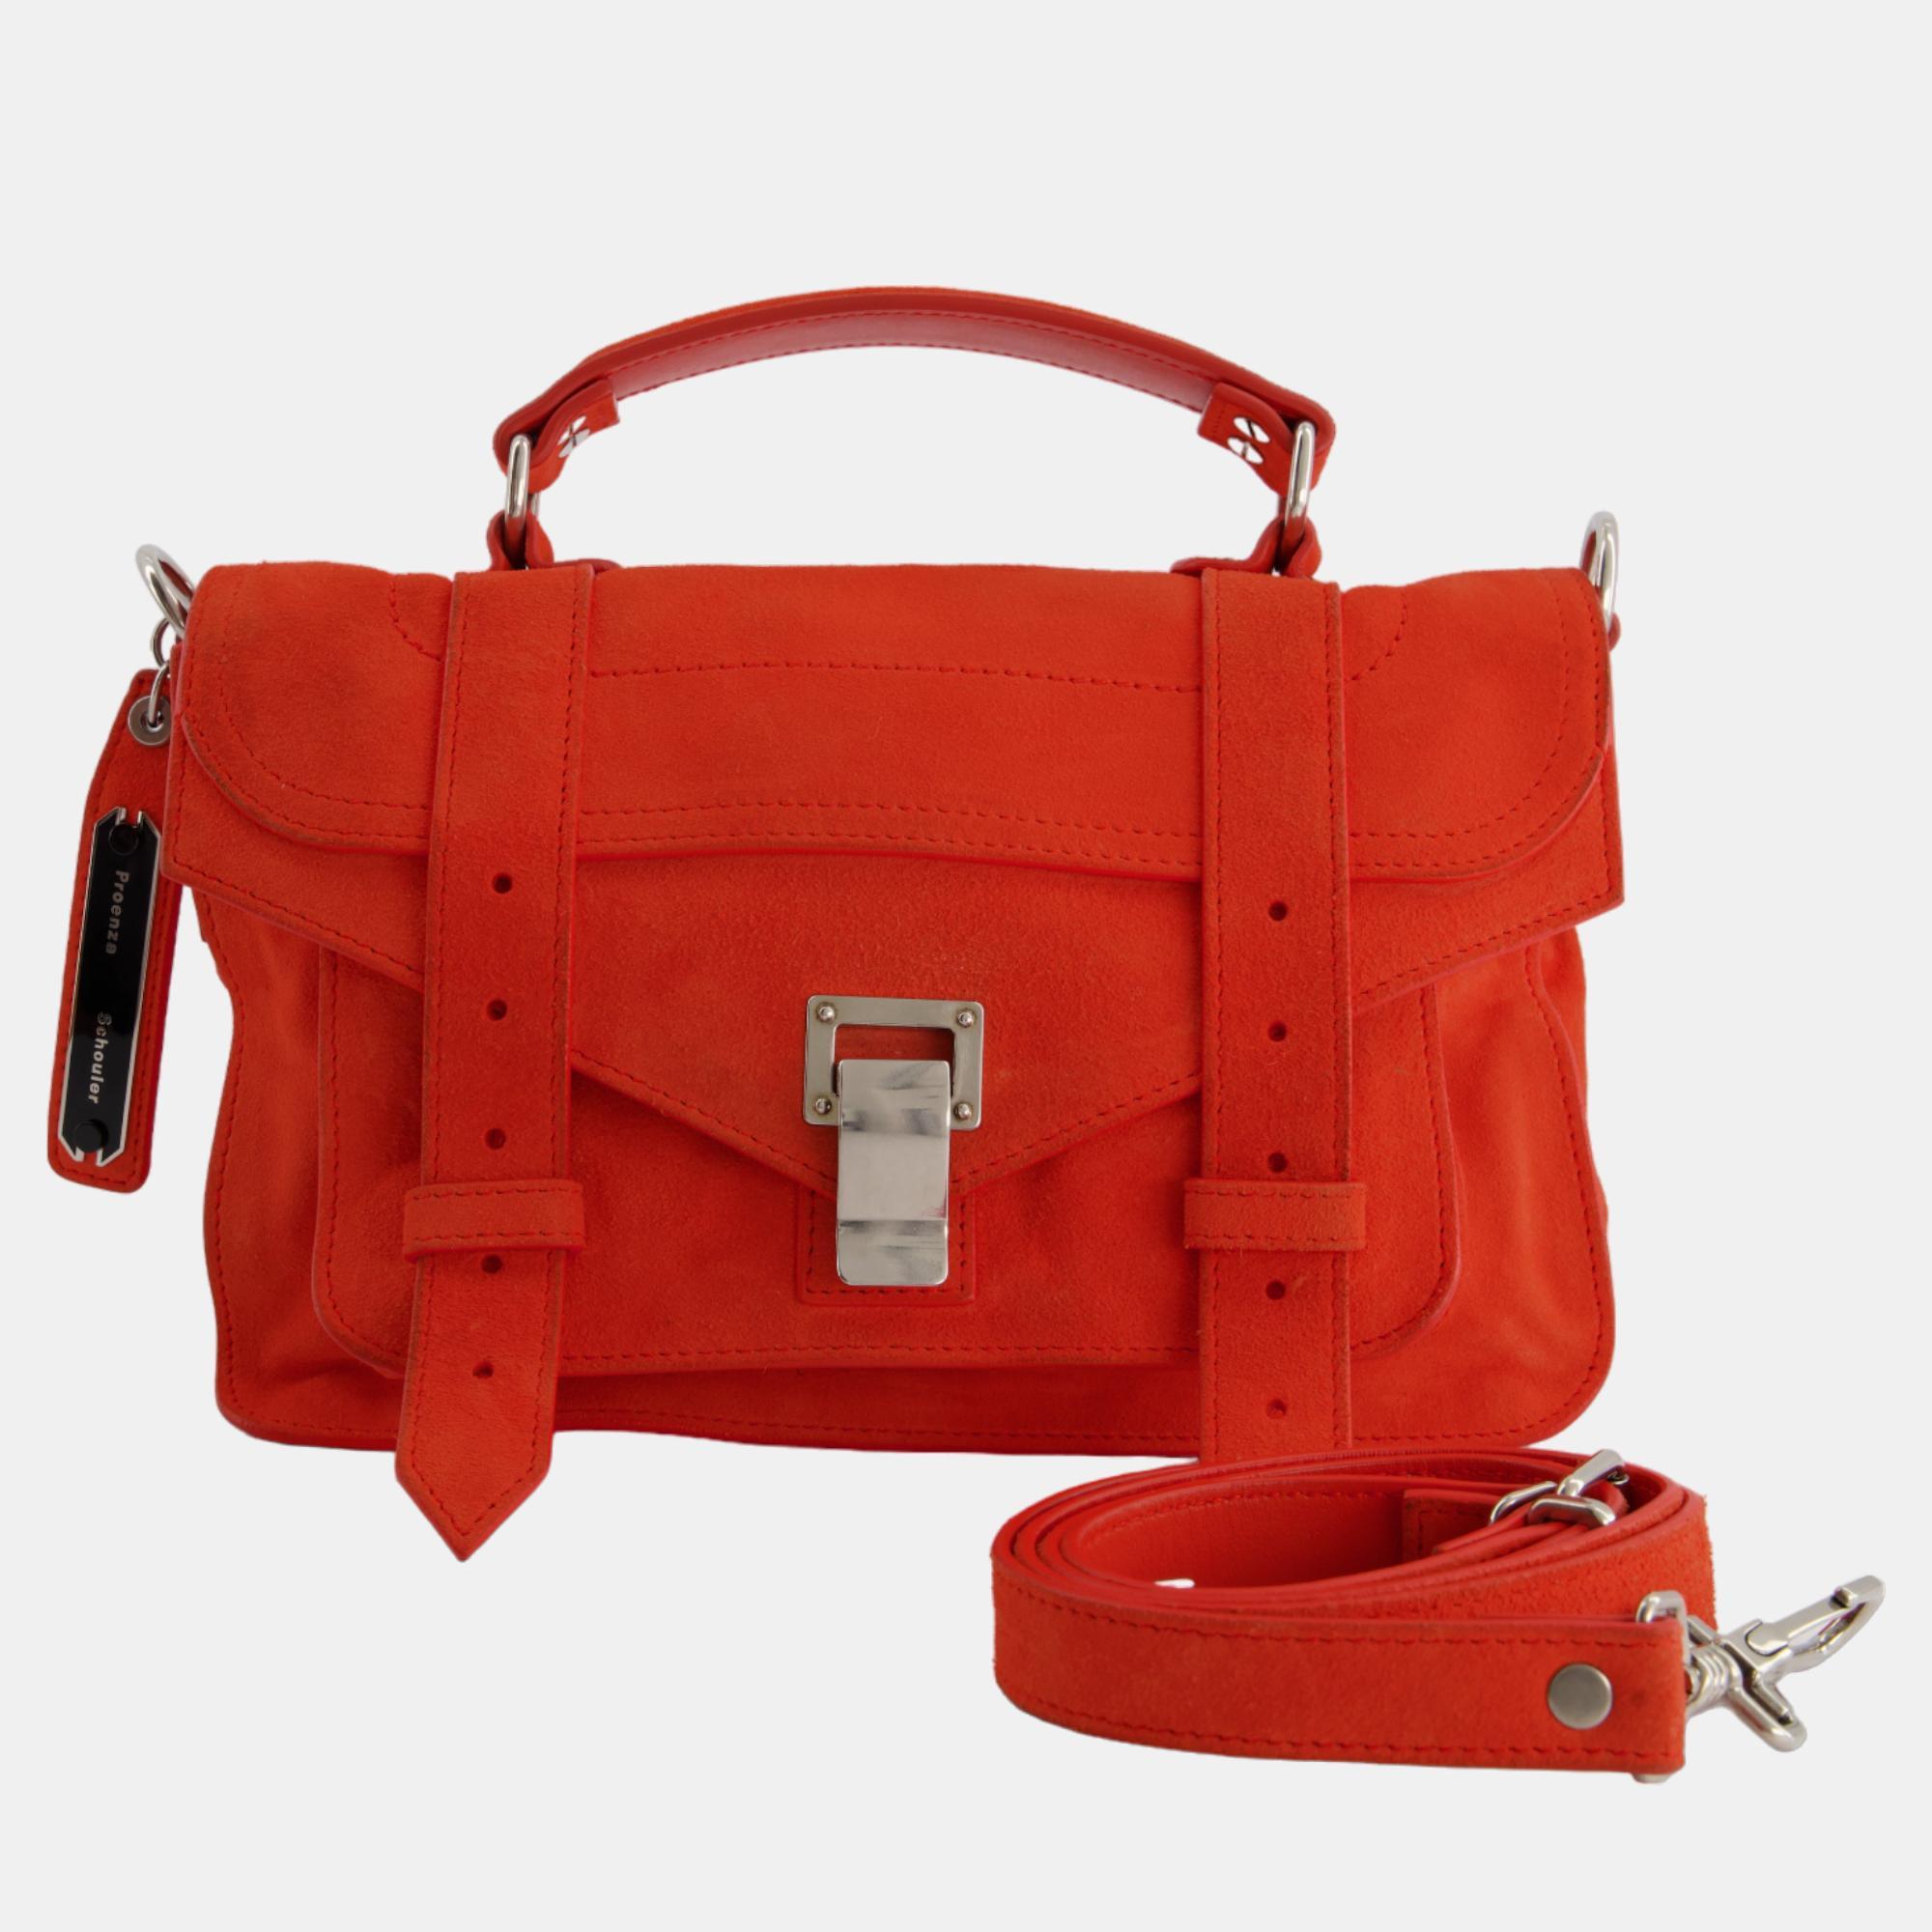 Proenza schouler coral red suede ps1 shoulder bag with silver hardware